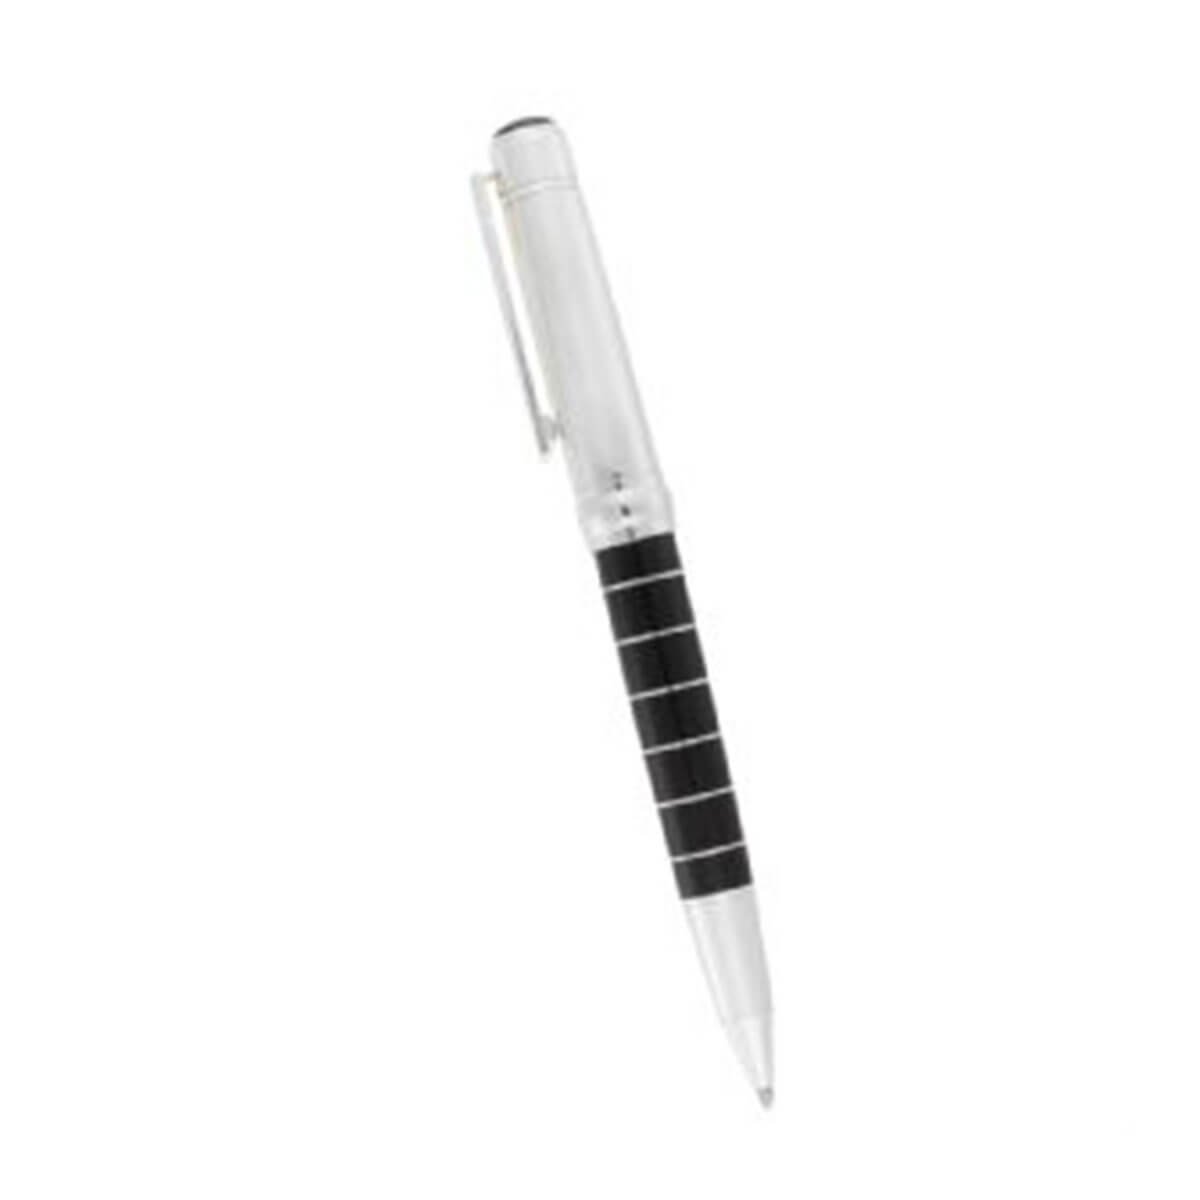 Cutter & Buck® Performance Series Twist Action Ball Pen-Black body with silver lid.